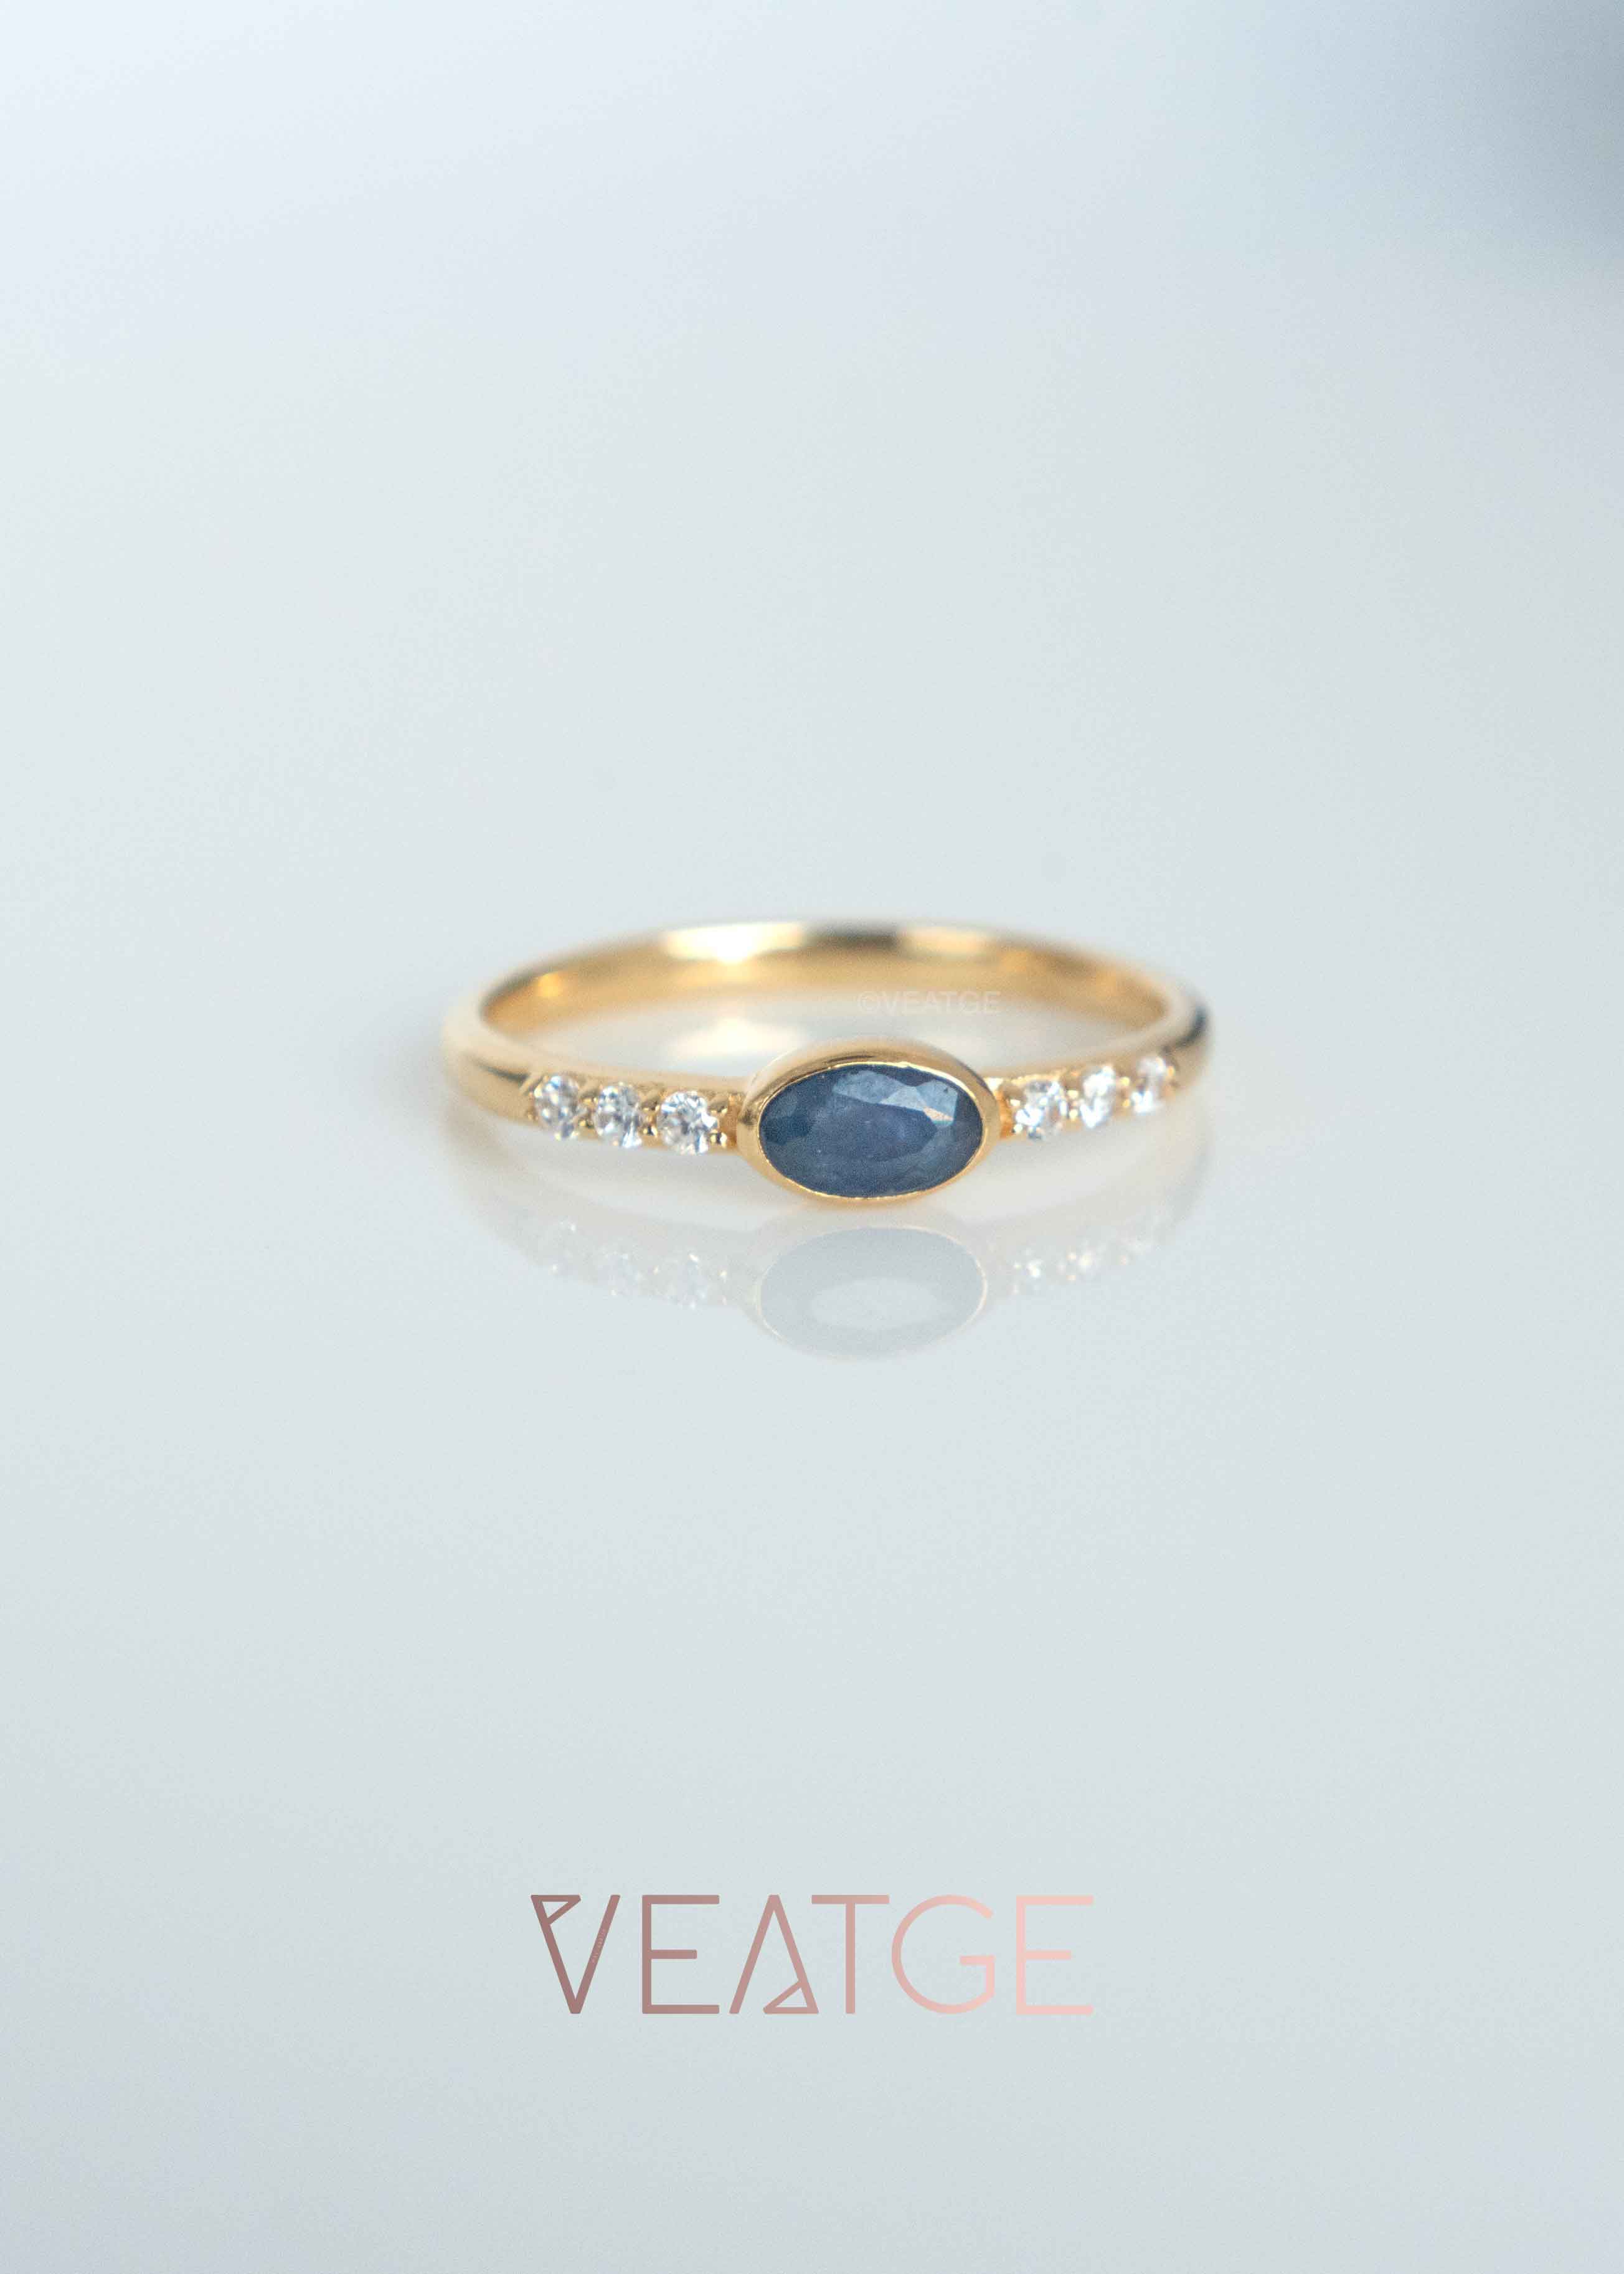 Genuine Sapphire stacking ring band